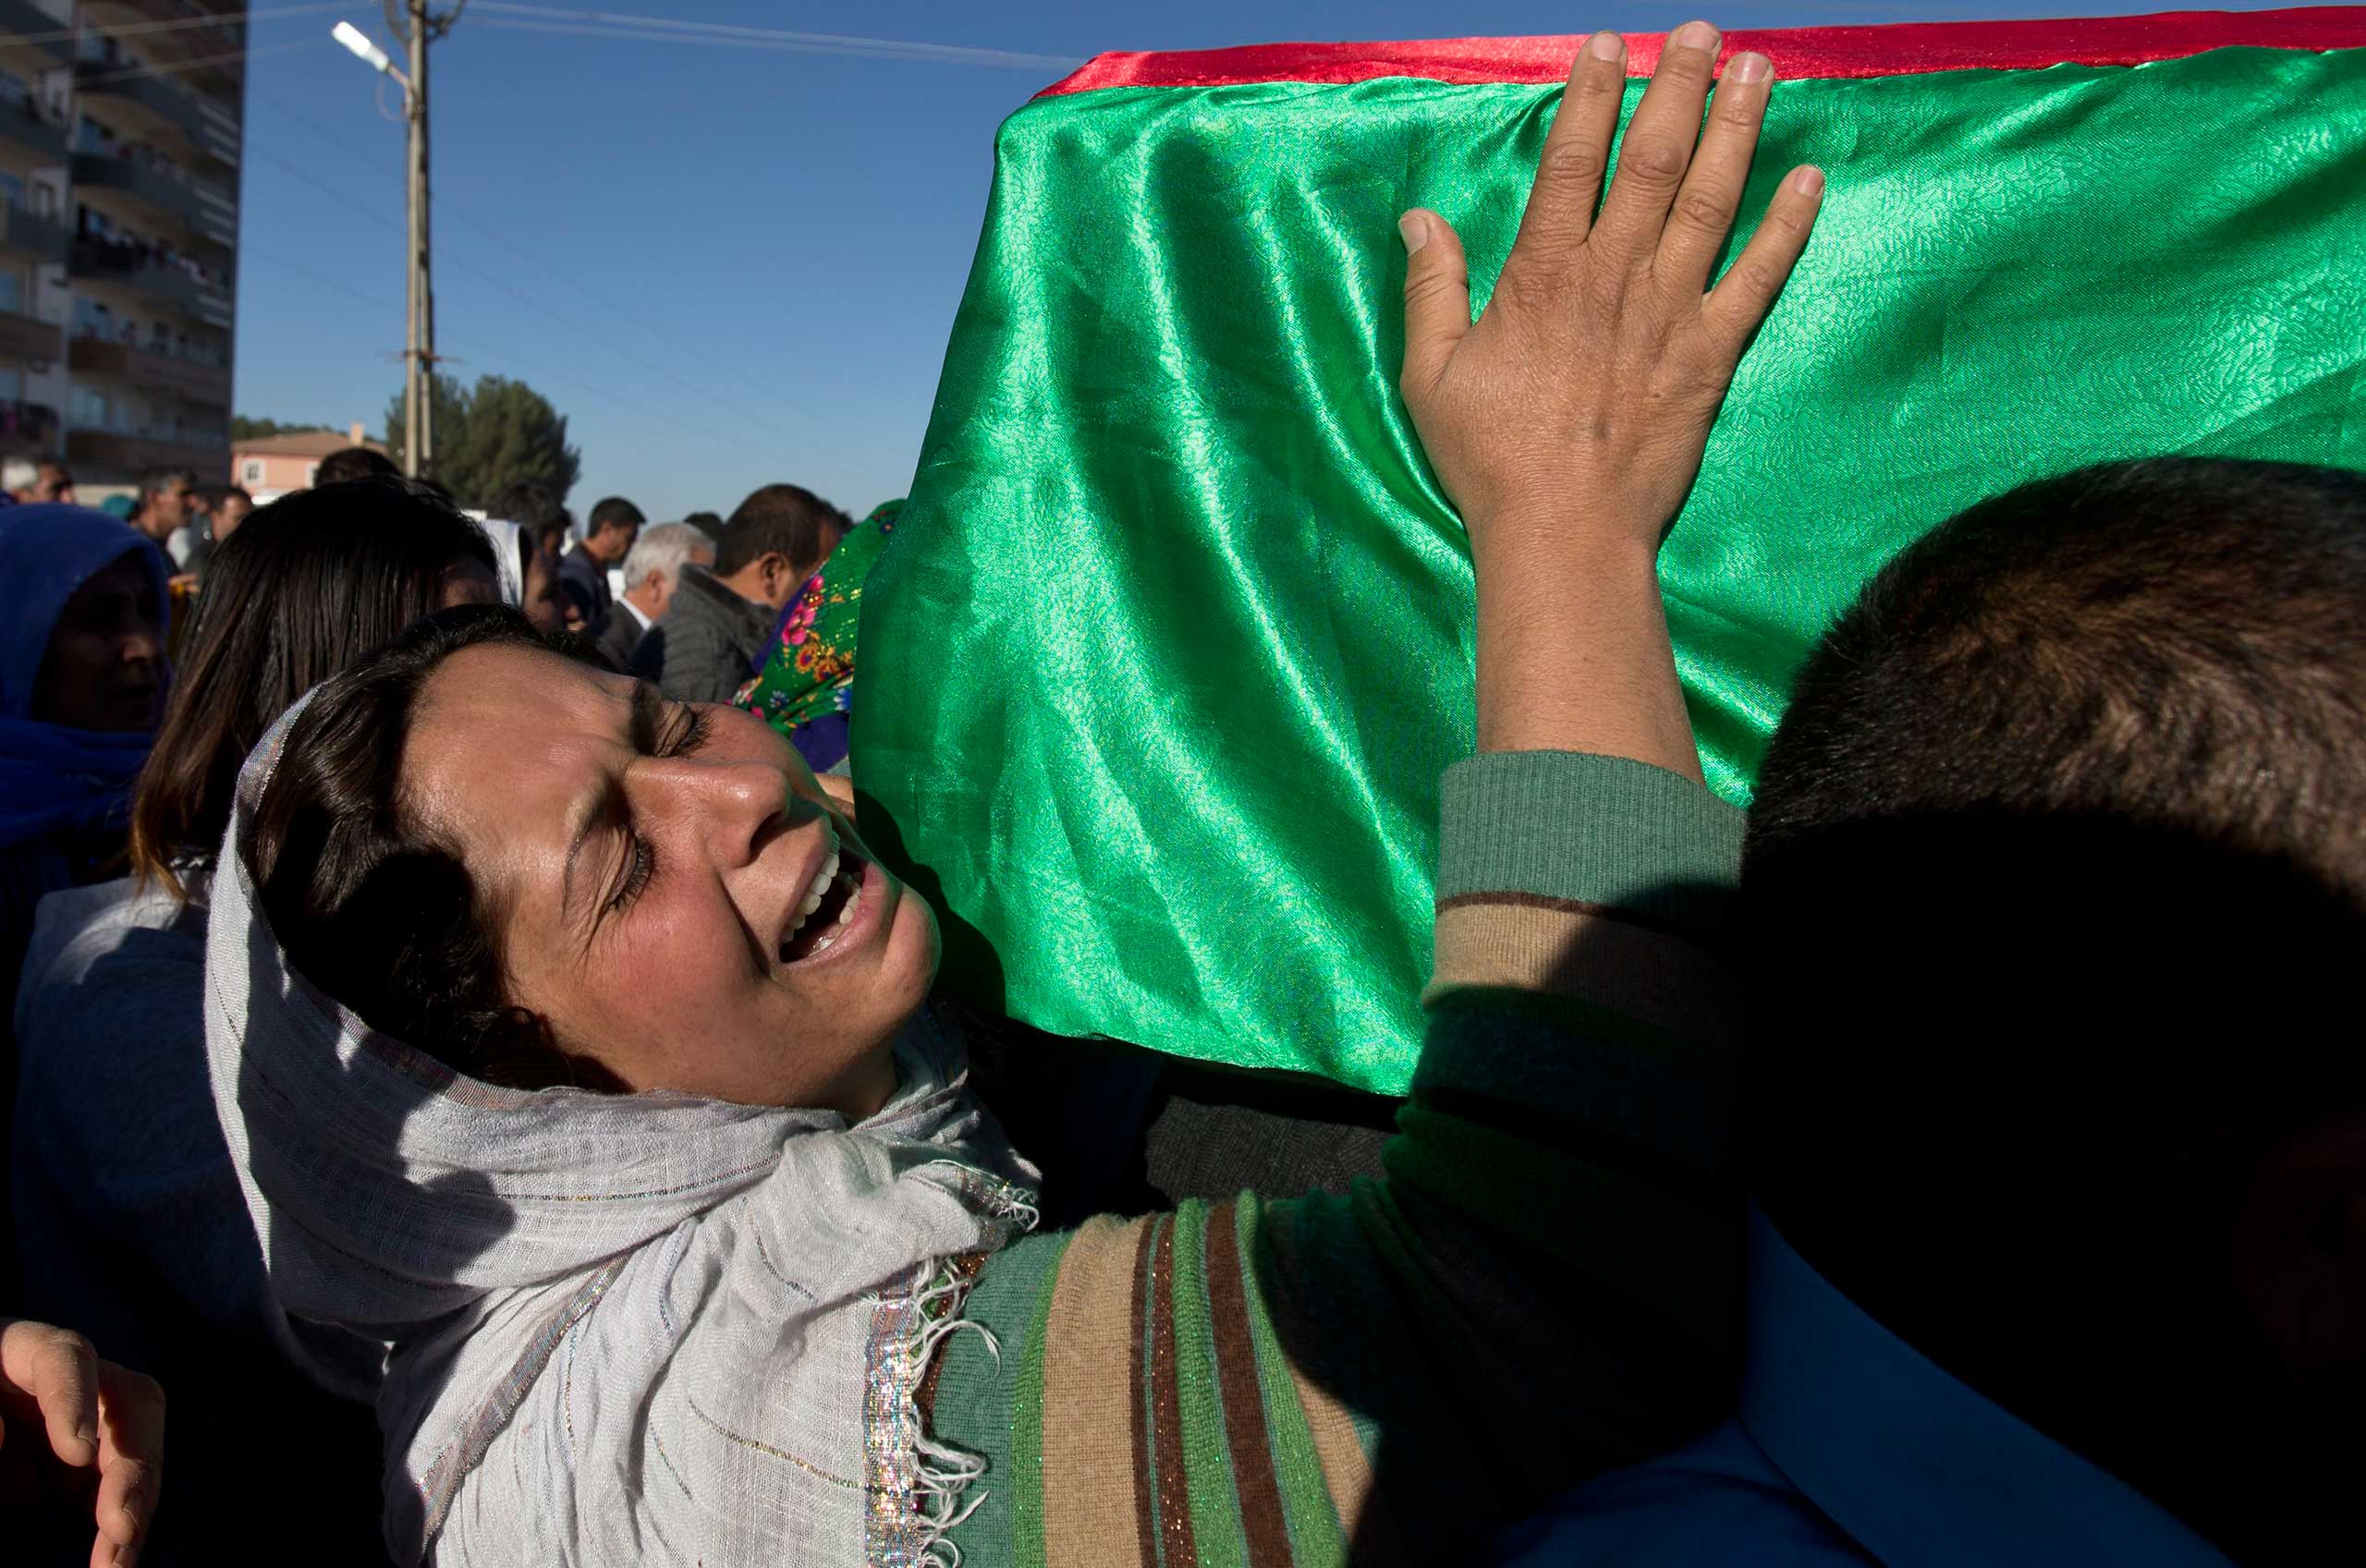 Nov. 7, 2014. A mourner cries holding onto the coffin of 19 year-old Syrian Kurdish female fighter Perwin Mustafa Dihap who died in Suruc, on the Turkey-Syria border, after being wounded during fighting against the Islamic State (ISIS) forces in her home town of Kobani.